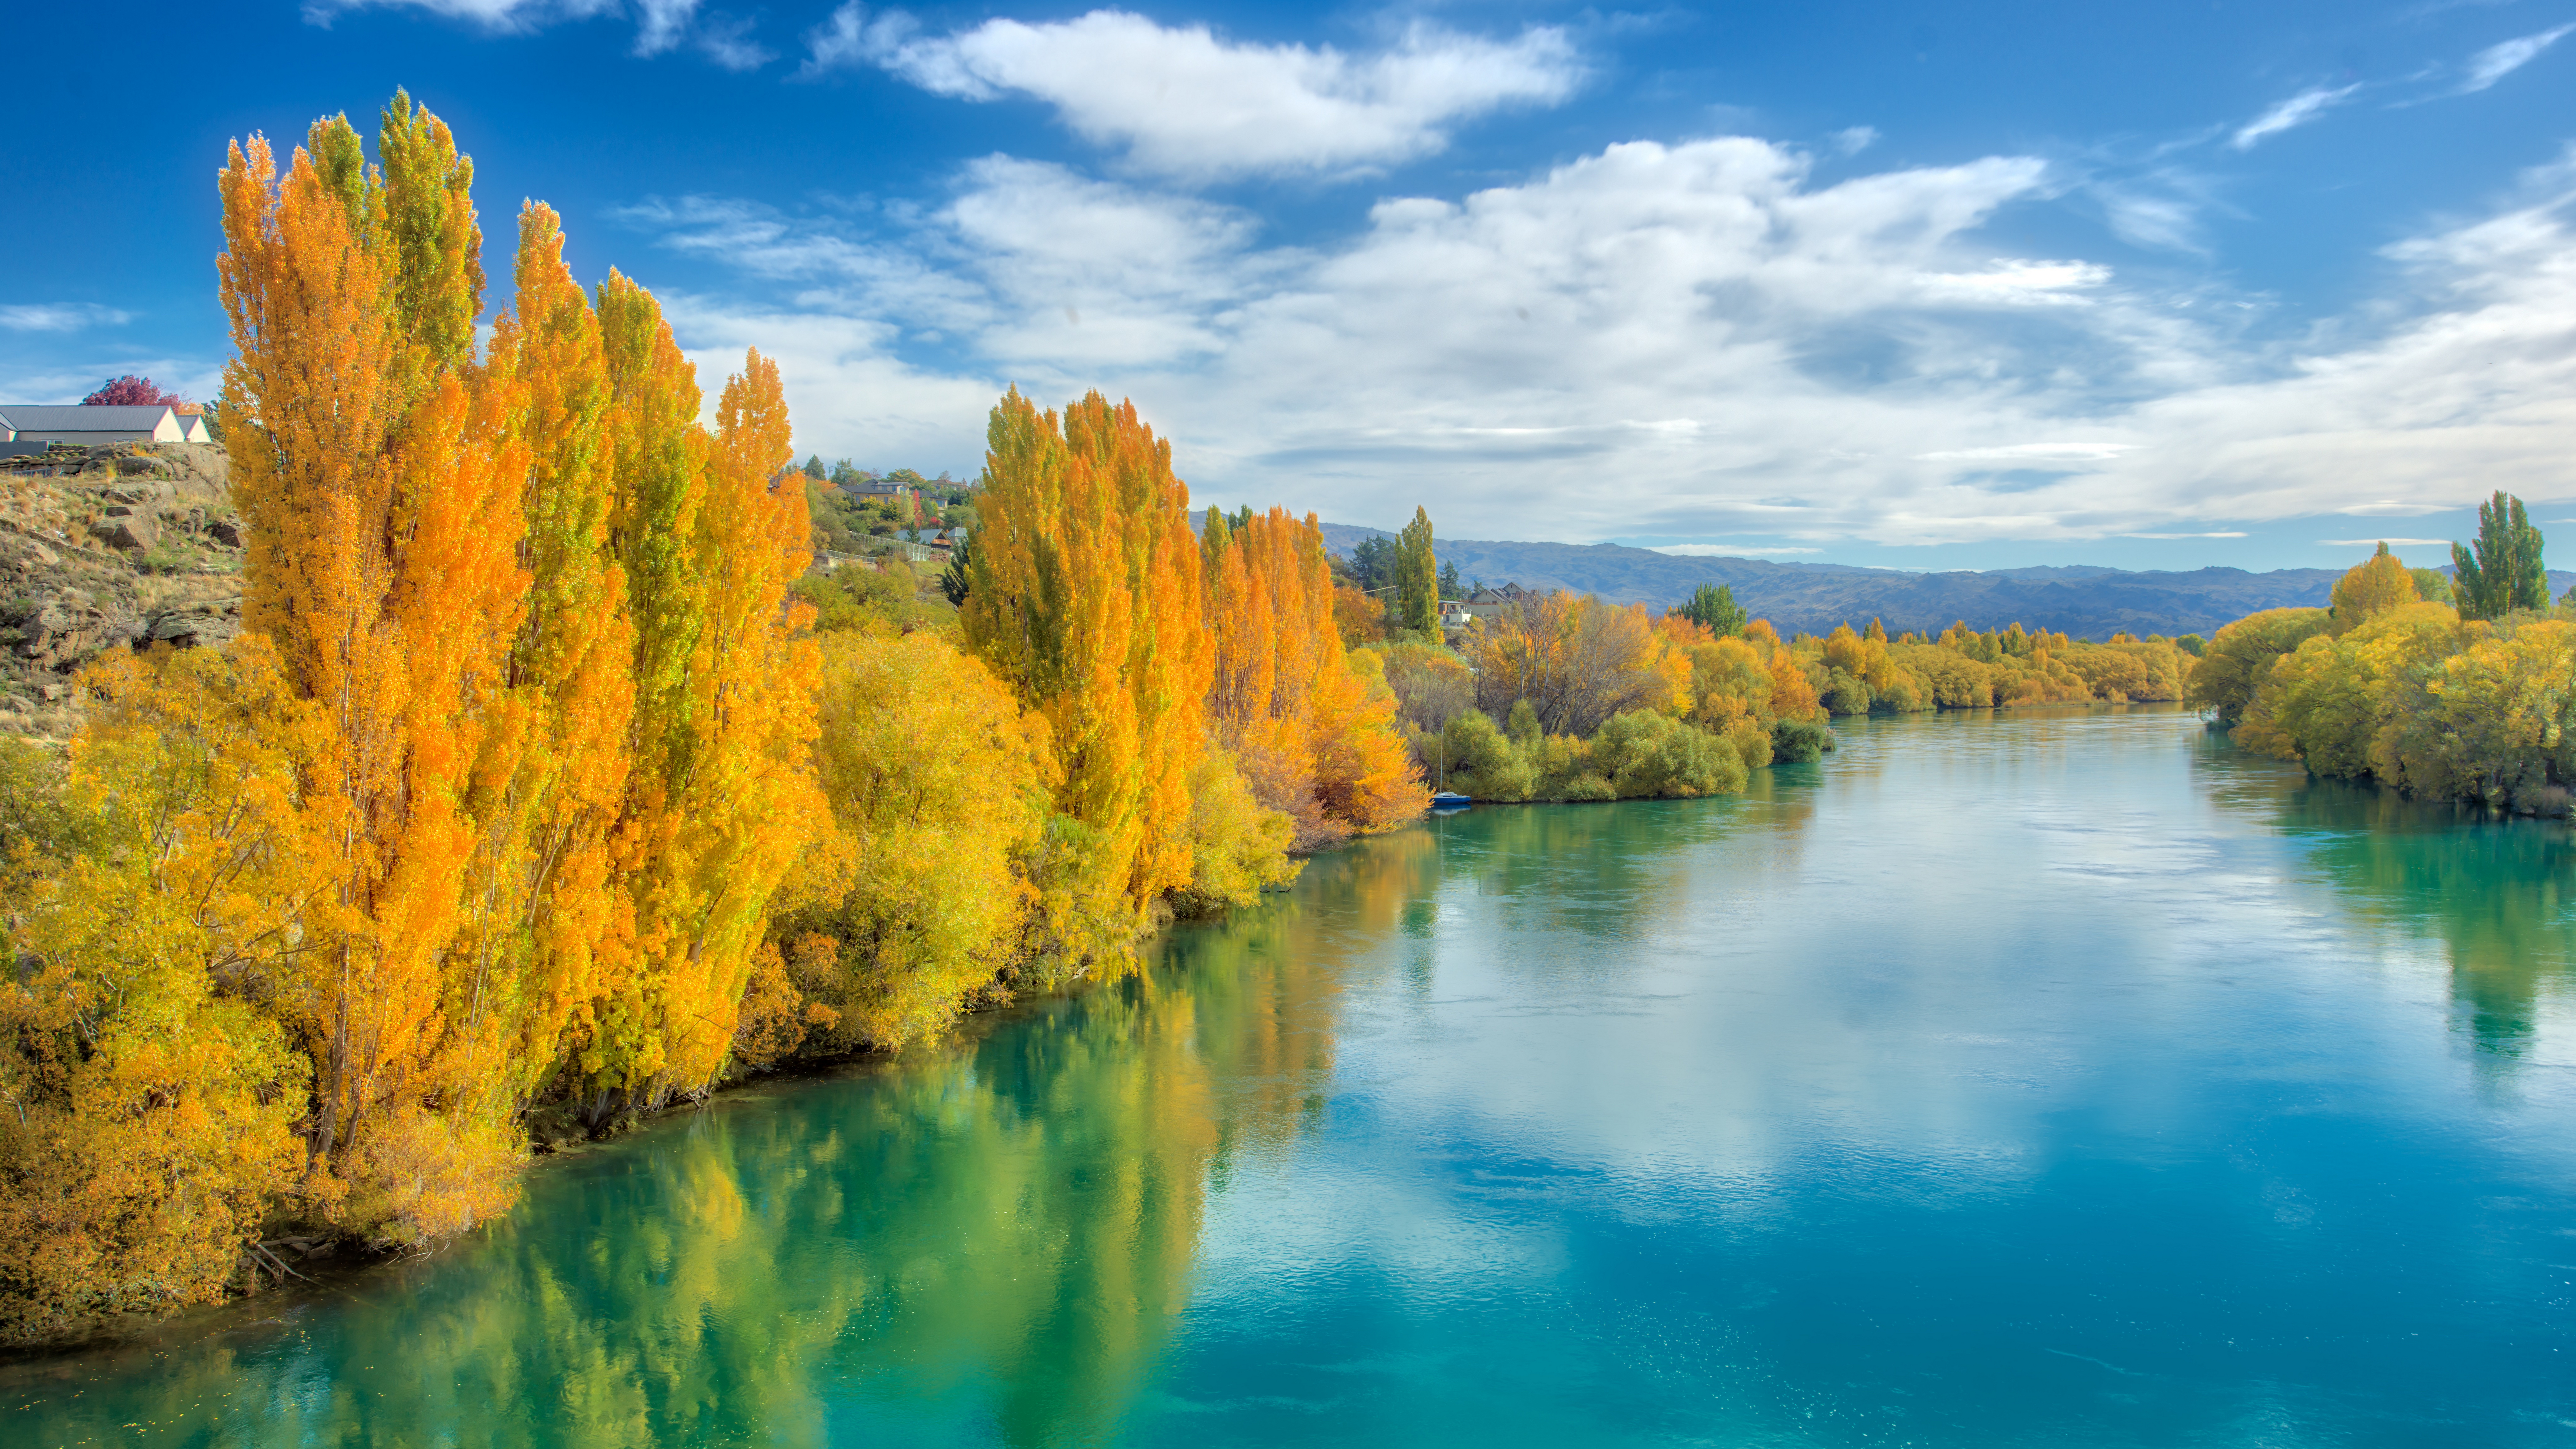 General 7680x4320 Trey Ratcliff photography river fall trees New Zealand water reflection sky clouds nature